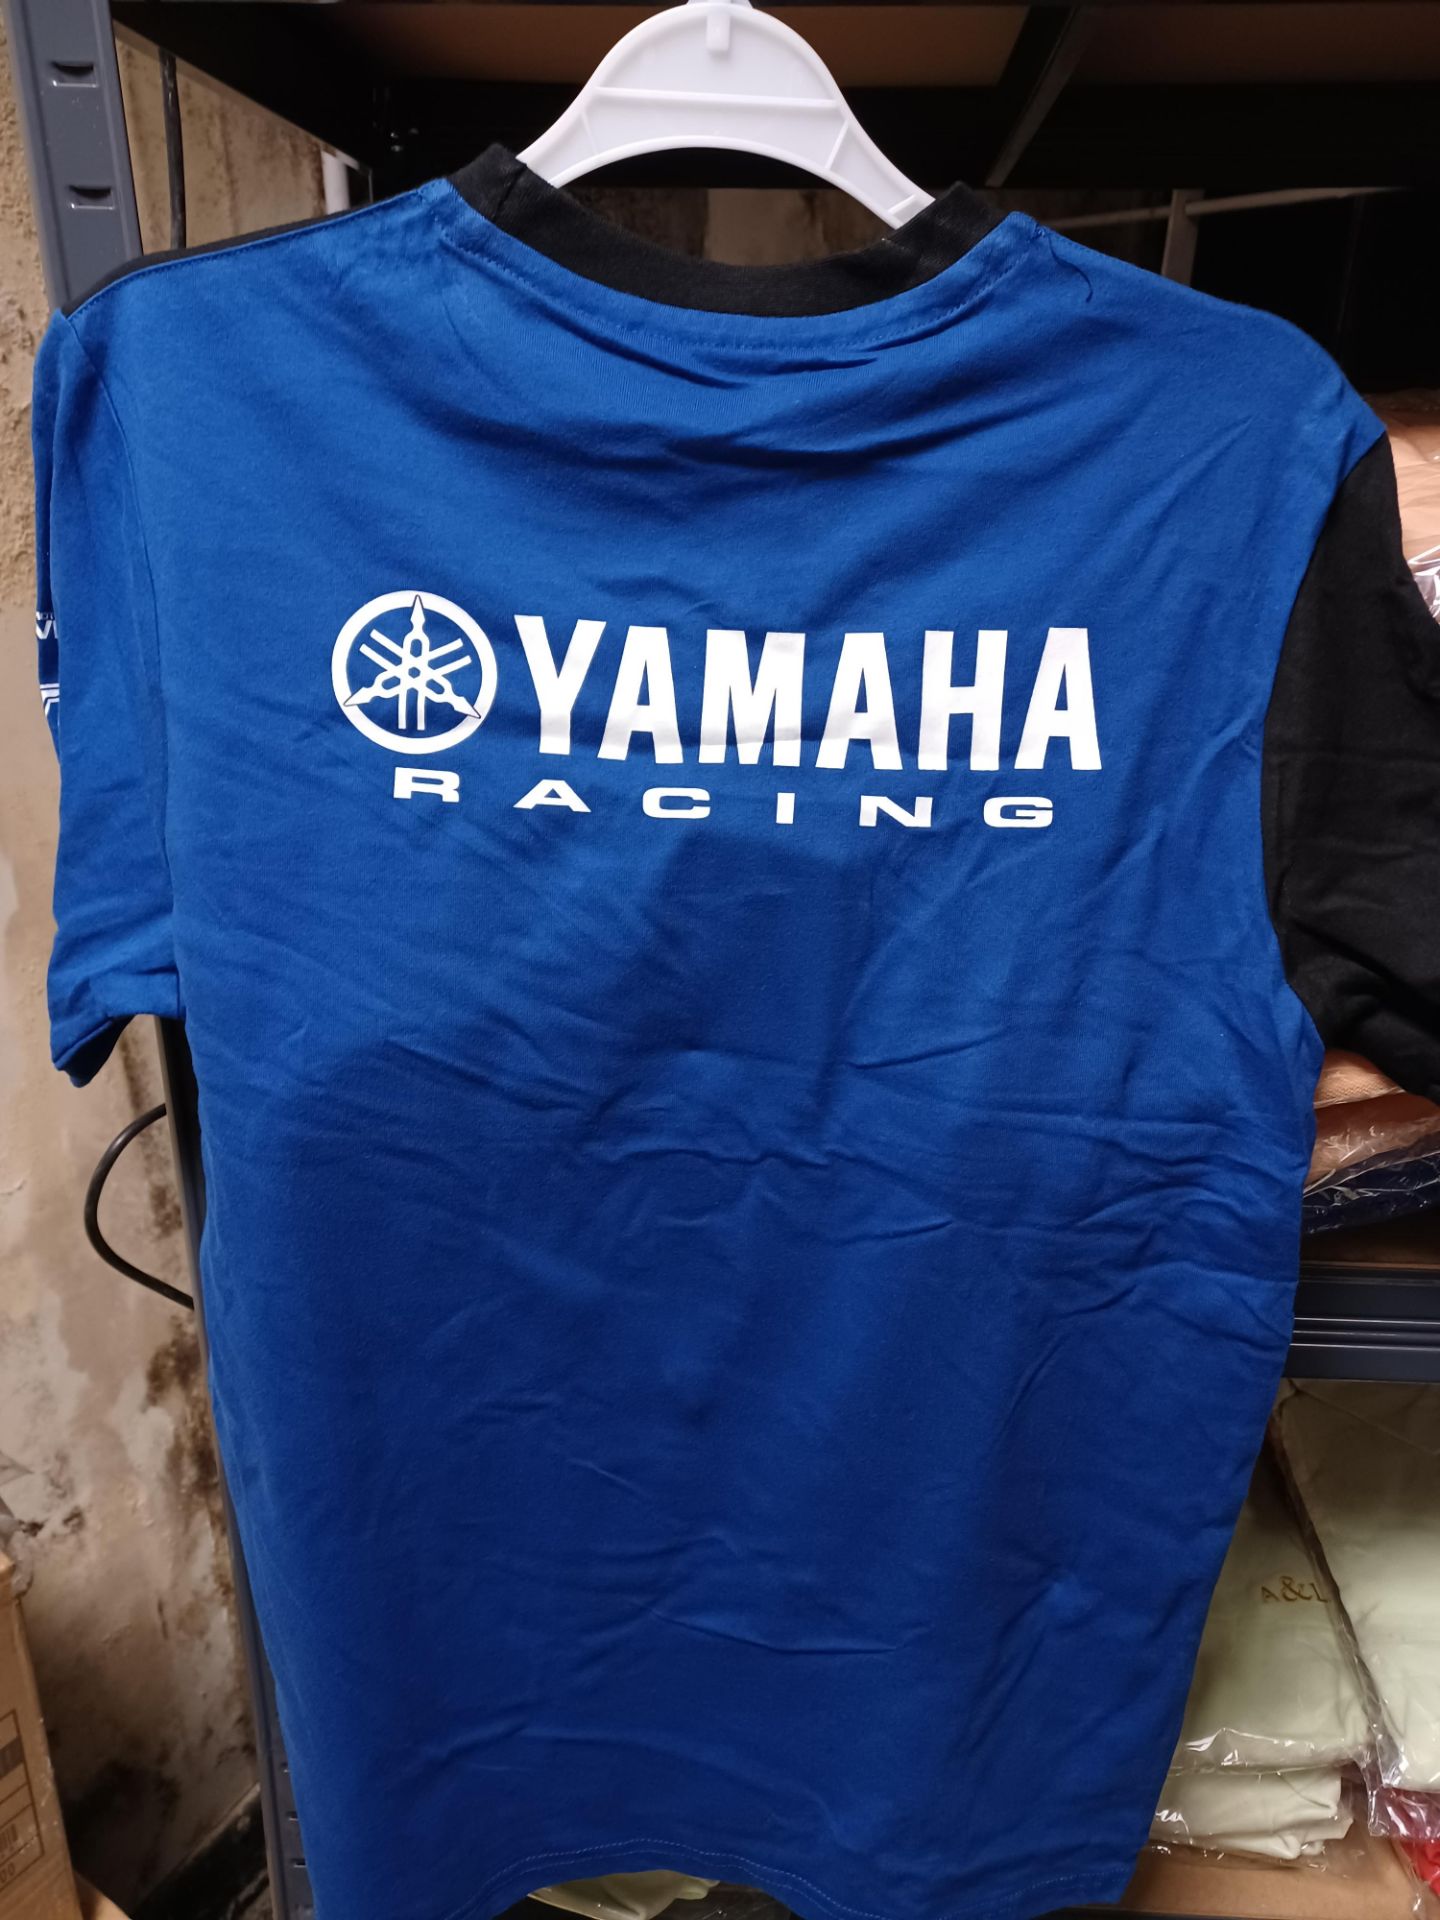 15 X OFFICIAL YAHAMA RACING POLO SHIRTS AND T SHIRTS IN ROYAL BLUE WITH TAGS SIZE SMALL - ER - Image 2 of 2